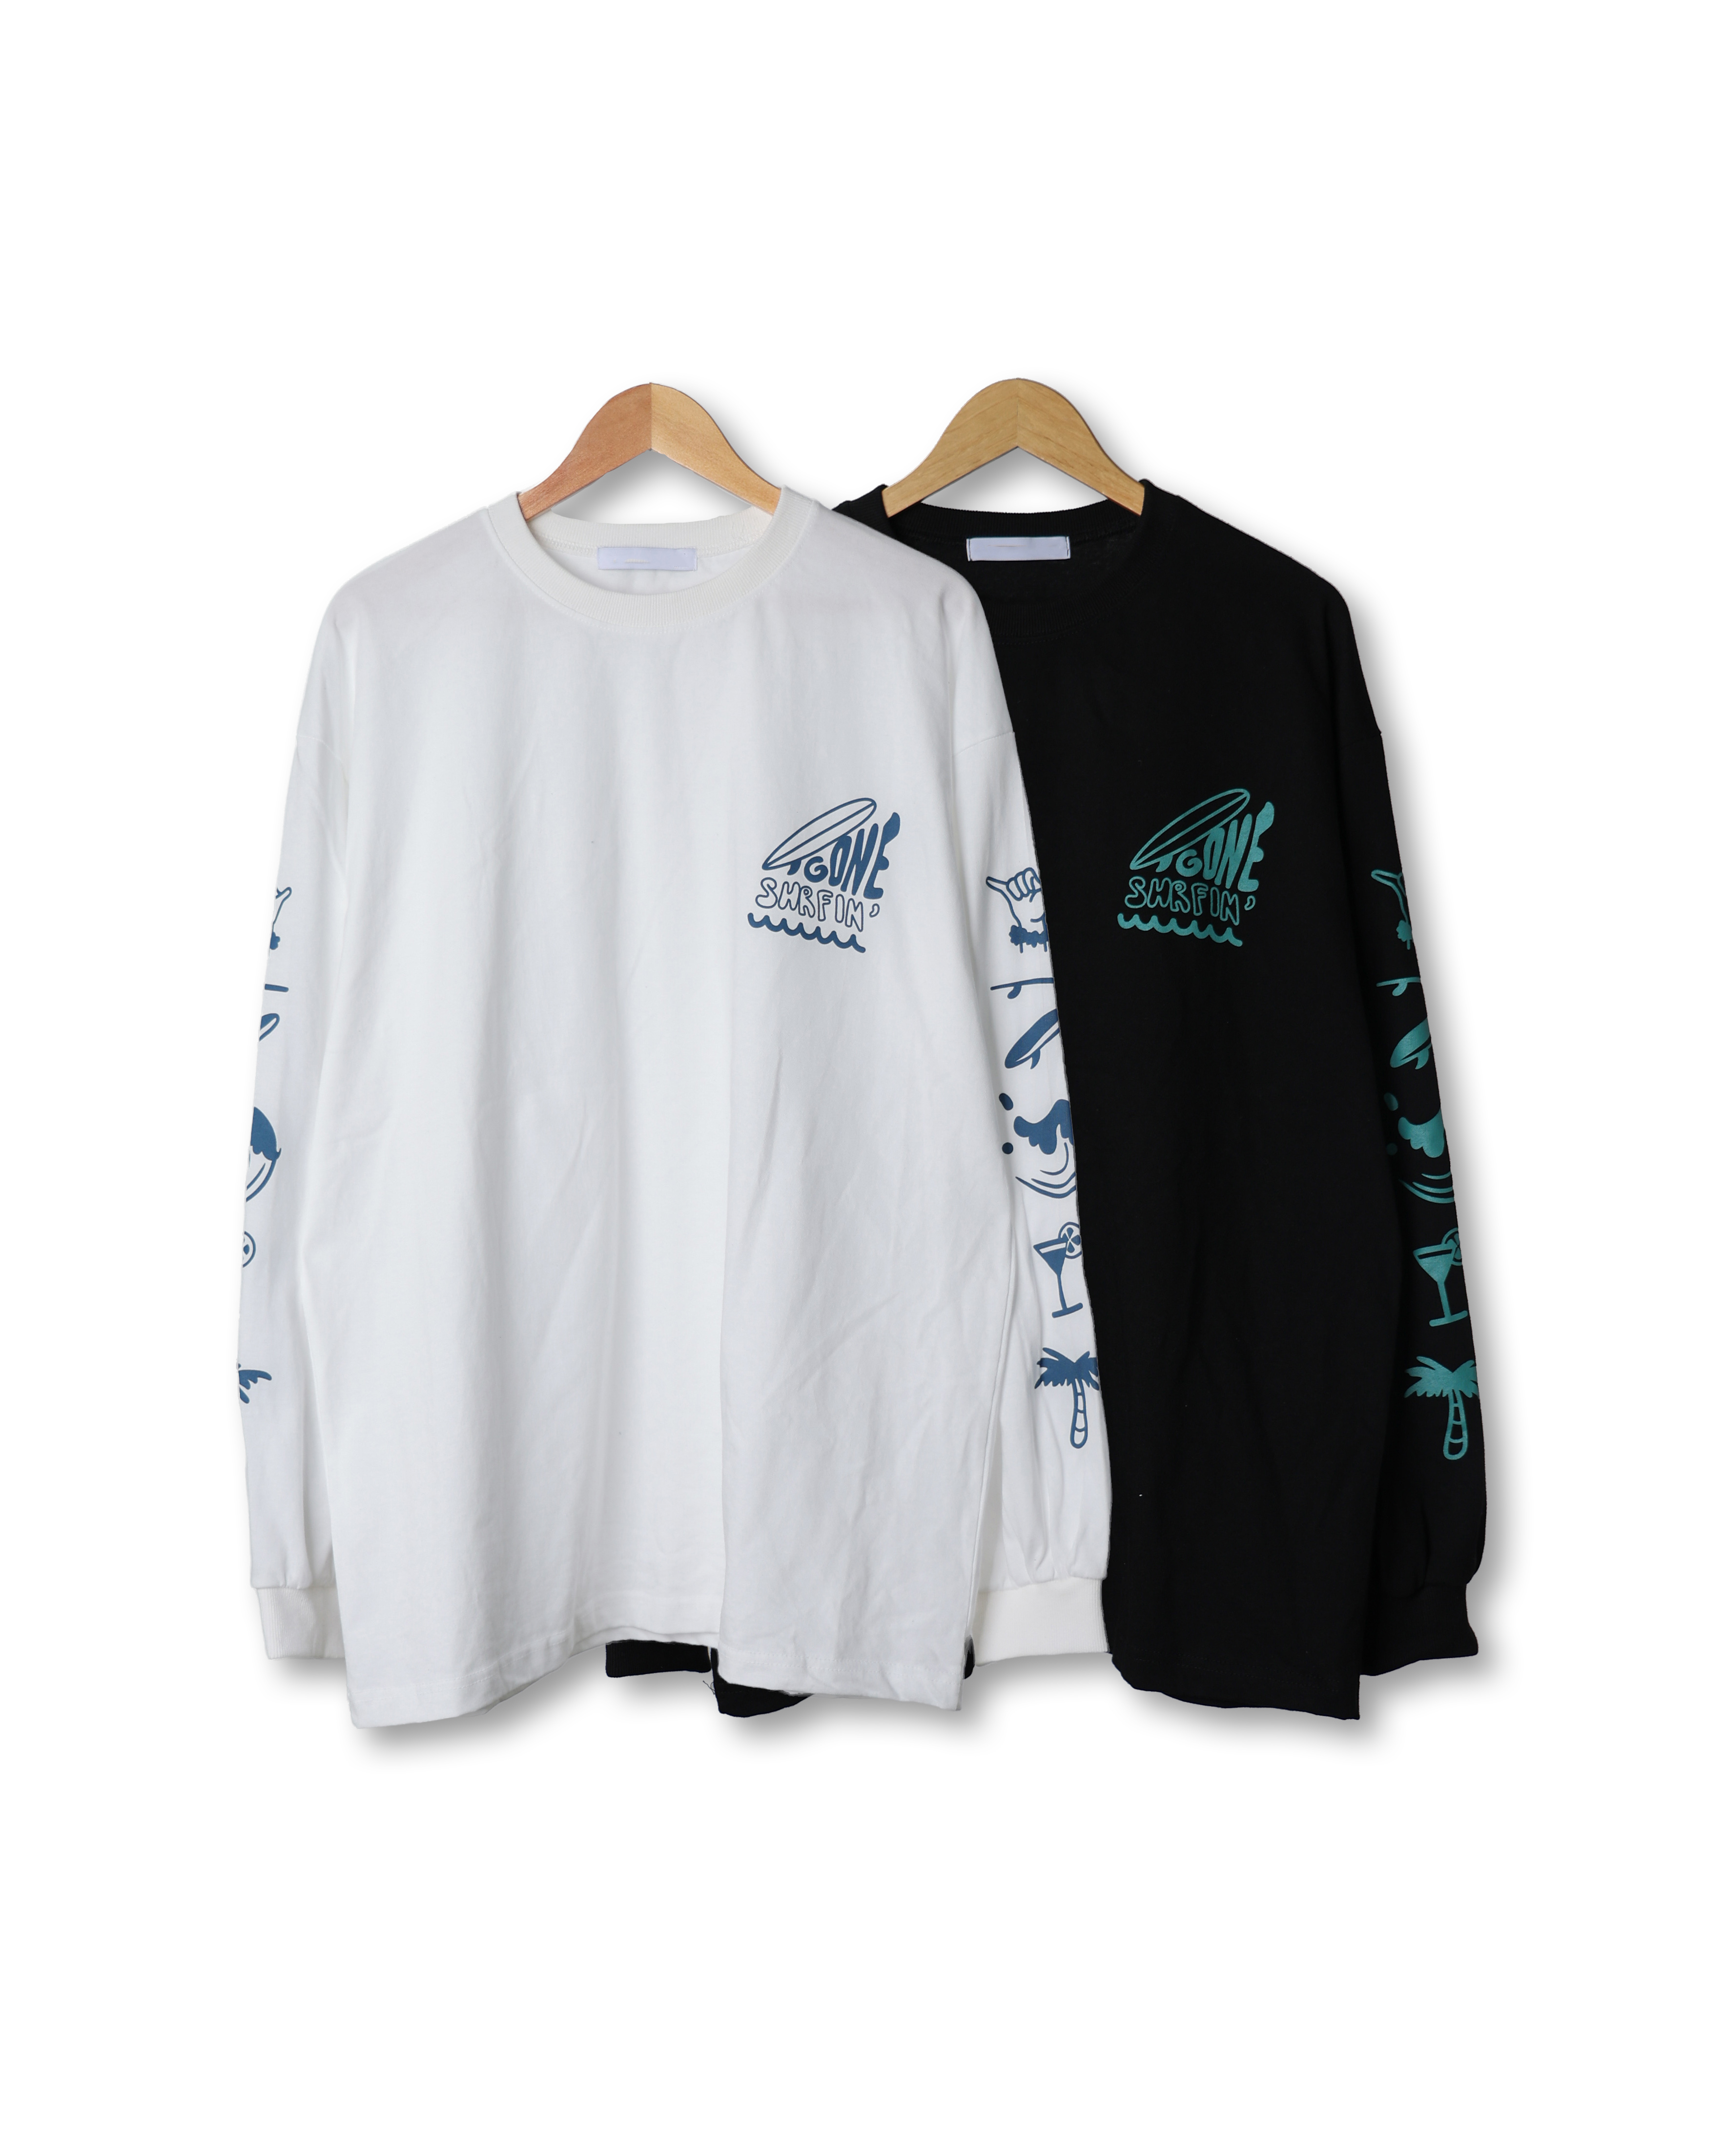 BCILD Surfin Printed Over Long Sleeve (Black/White)